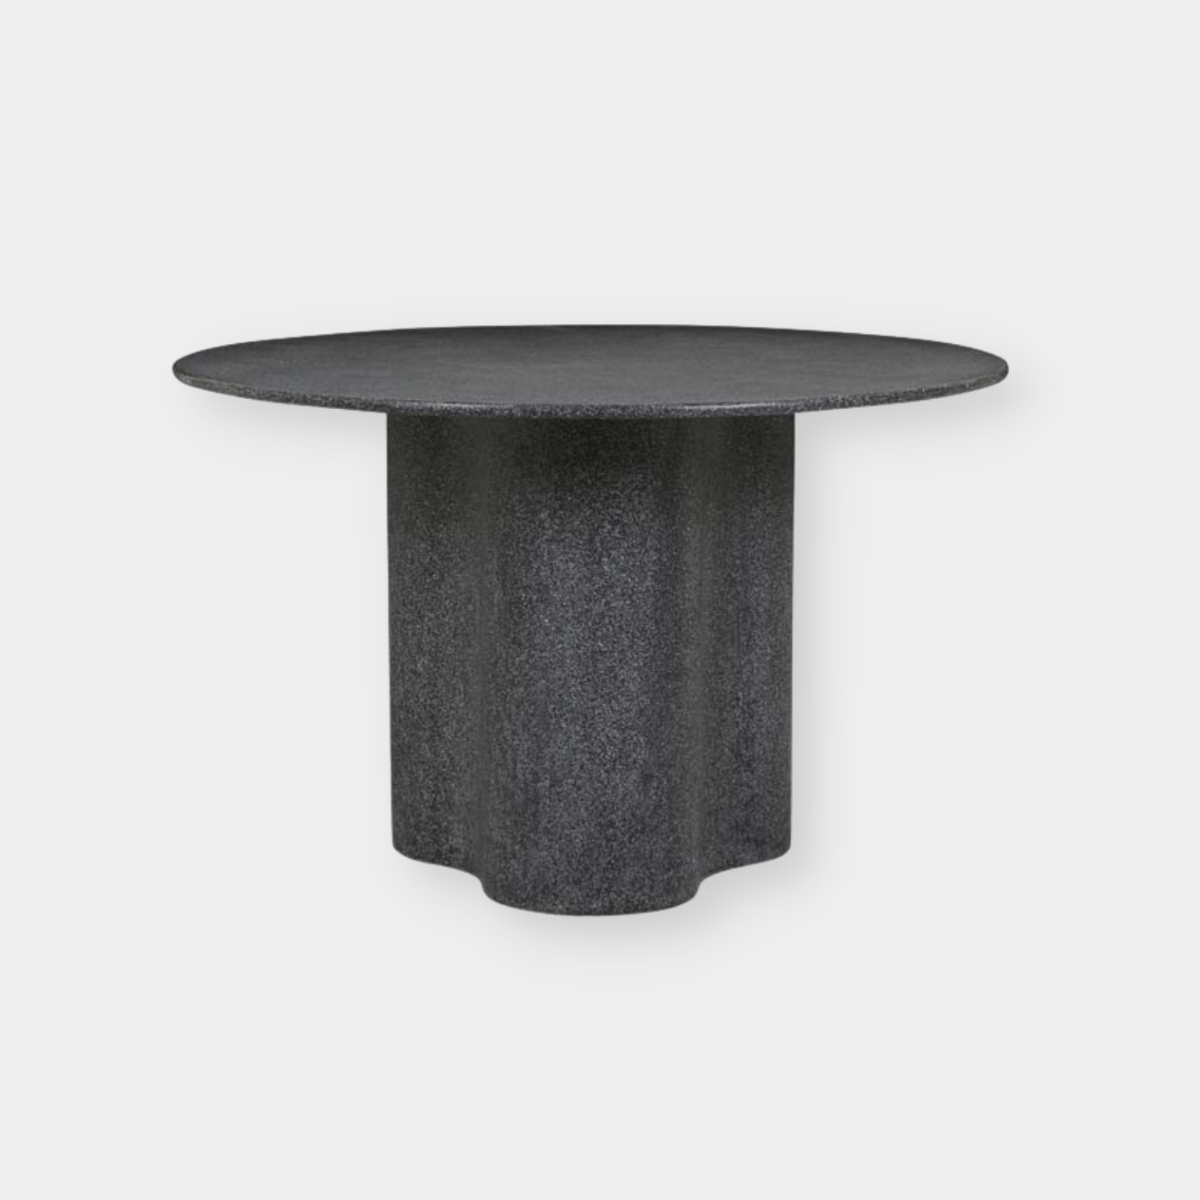 Globe West Dining Tables Globe West Artie Outdoor Wave Dining Table, Black Speckle (7890235359481)